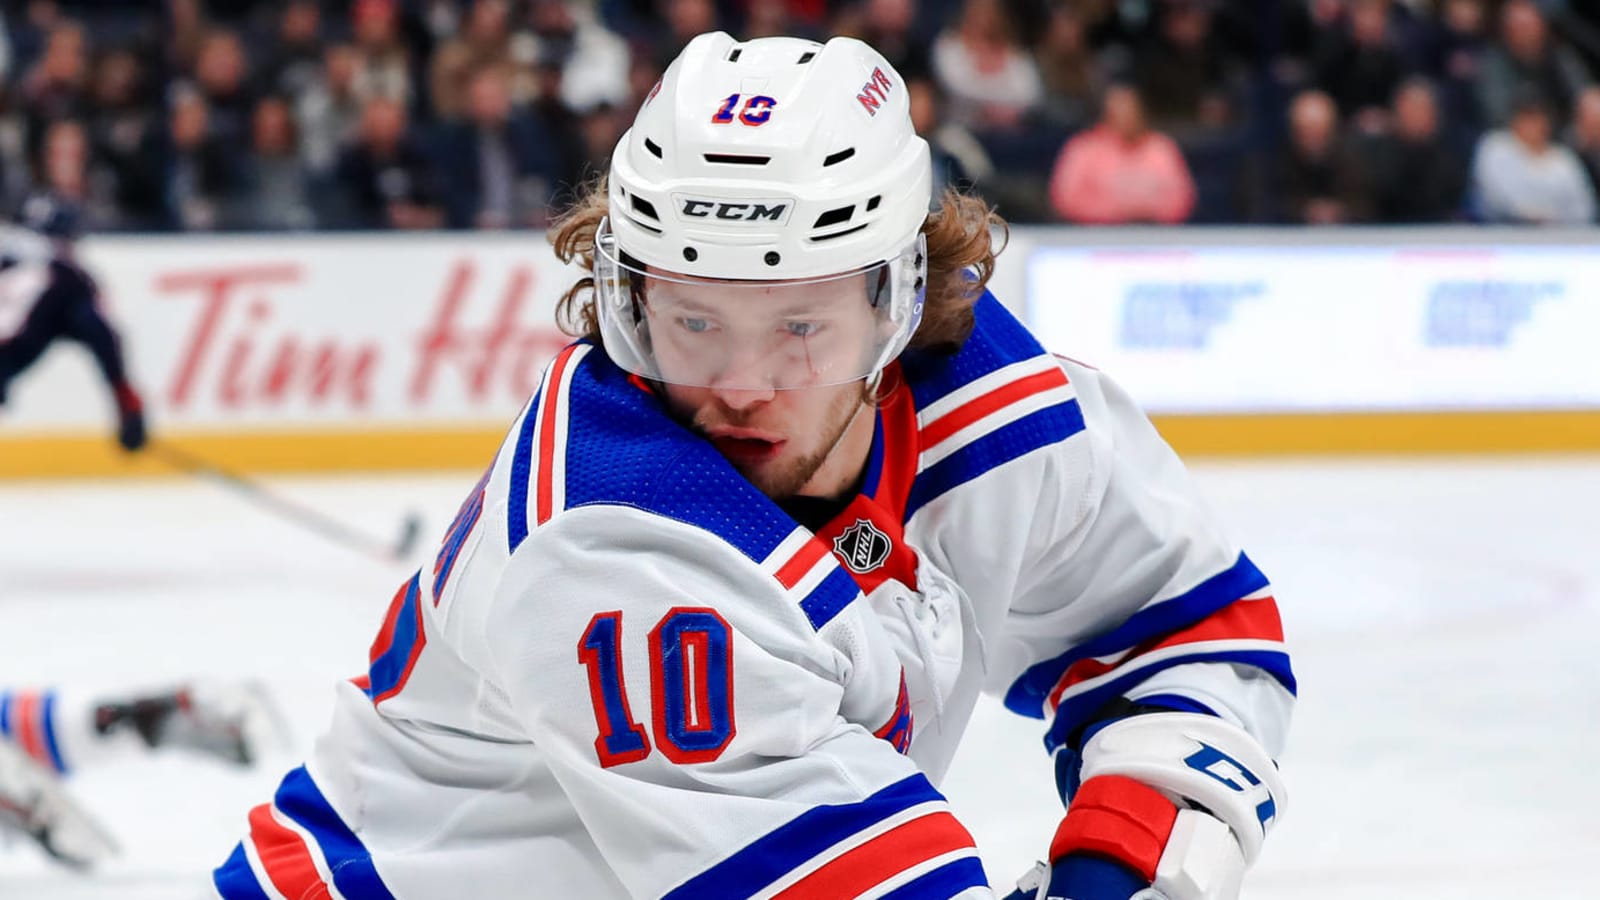 Rangers beat Bruins 4-0 in Panarin's first game back - The San